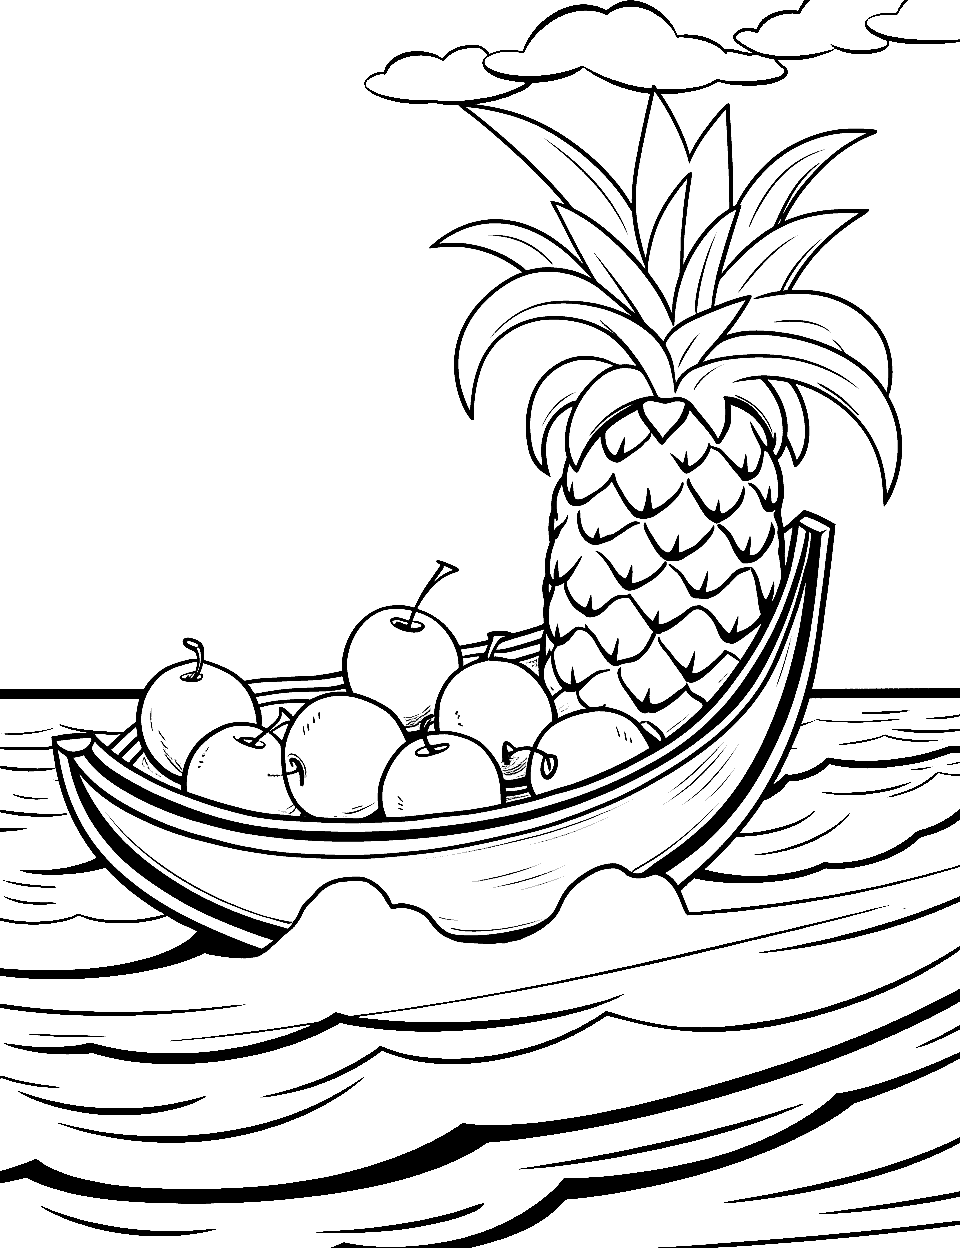 Banana Boat Adventure Fruit Coloring Page - A banana shaped like a boat floating on a wavy sea carrying other fruits.